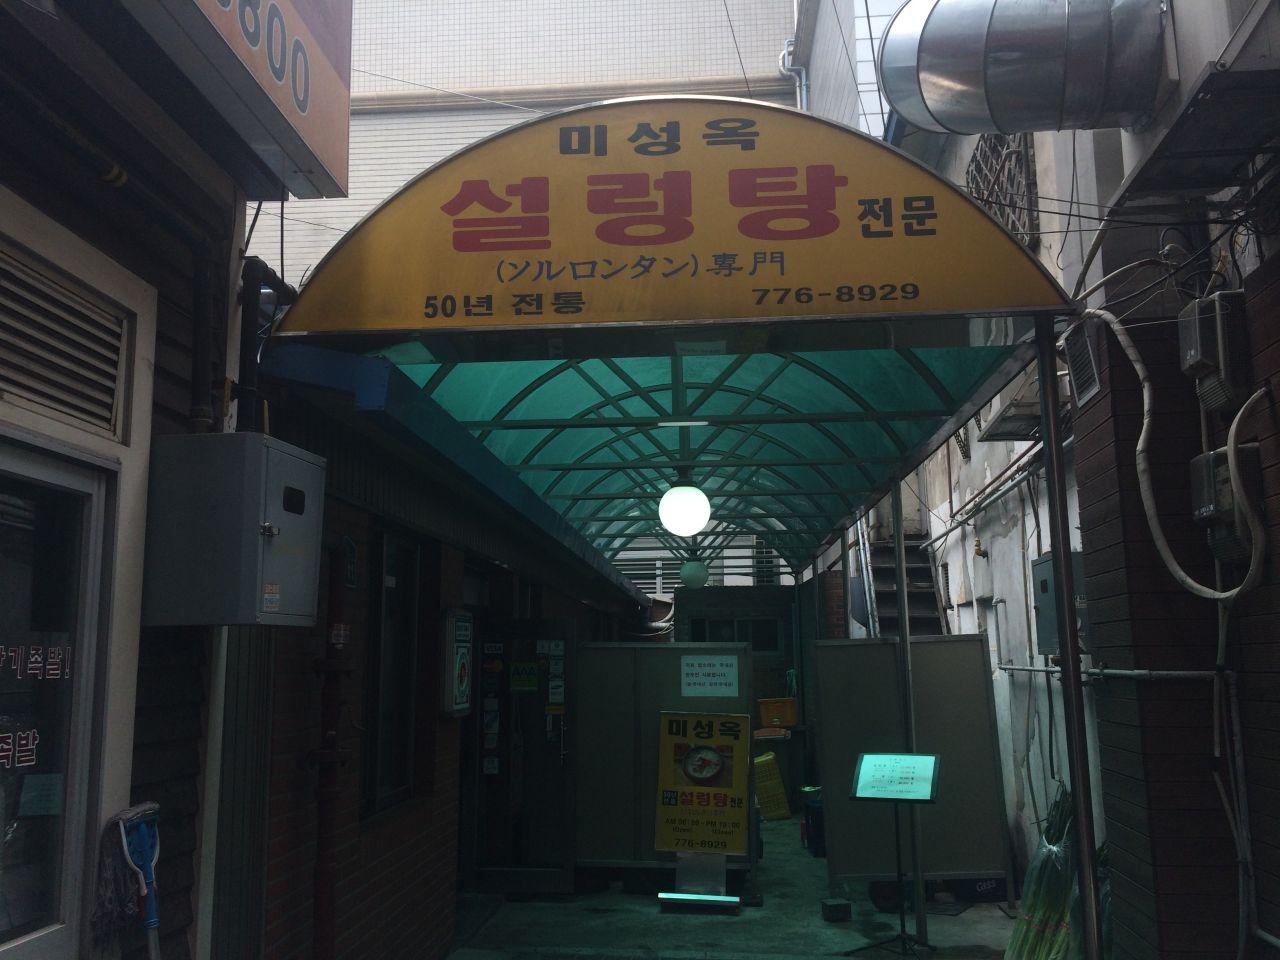 exterior of Mi Sung Ok, a metropolitan area restaurant specializing in traditional Korean soup dishes like 설렁탕. 